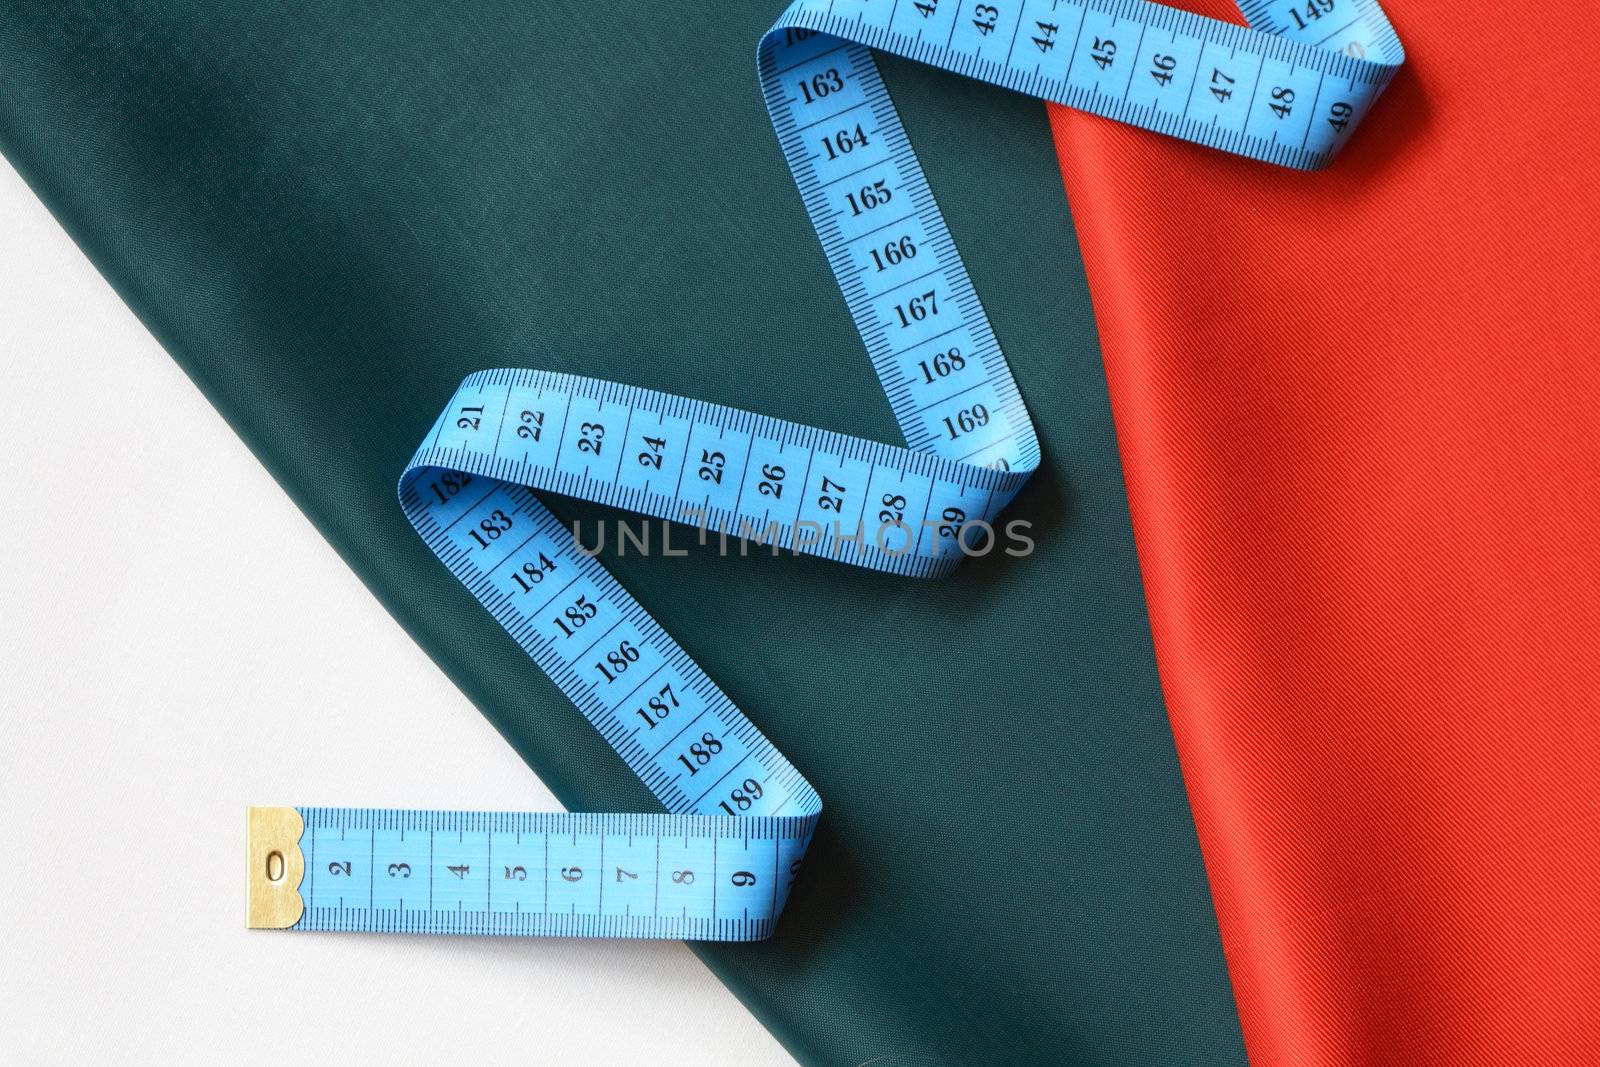 Blue tape measure on background with colored cloth